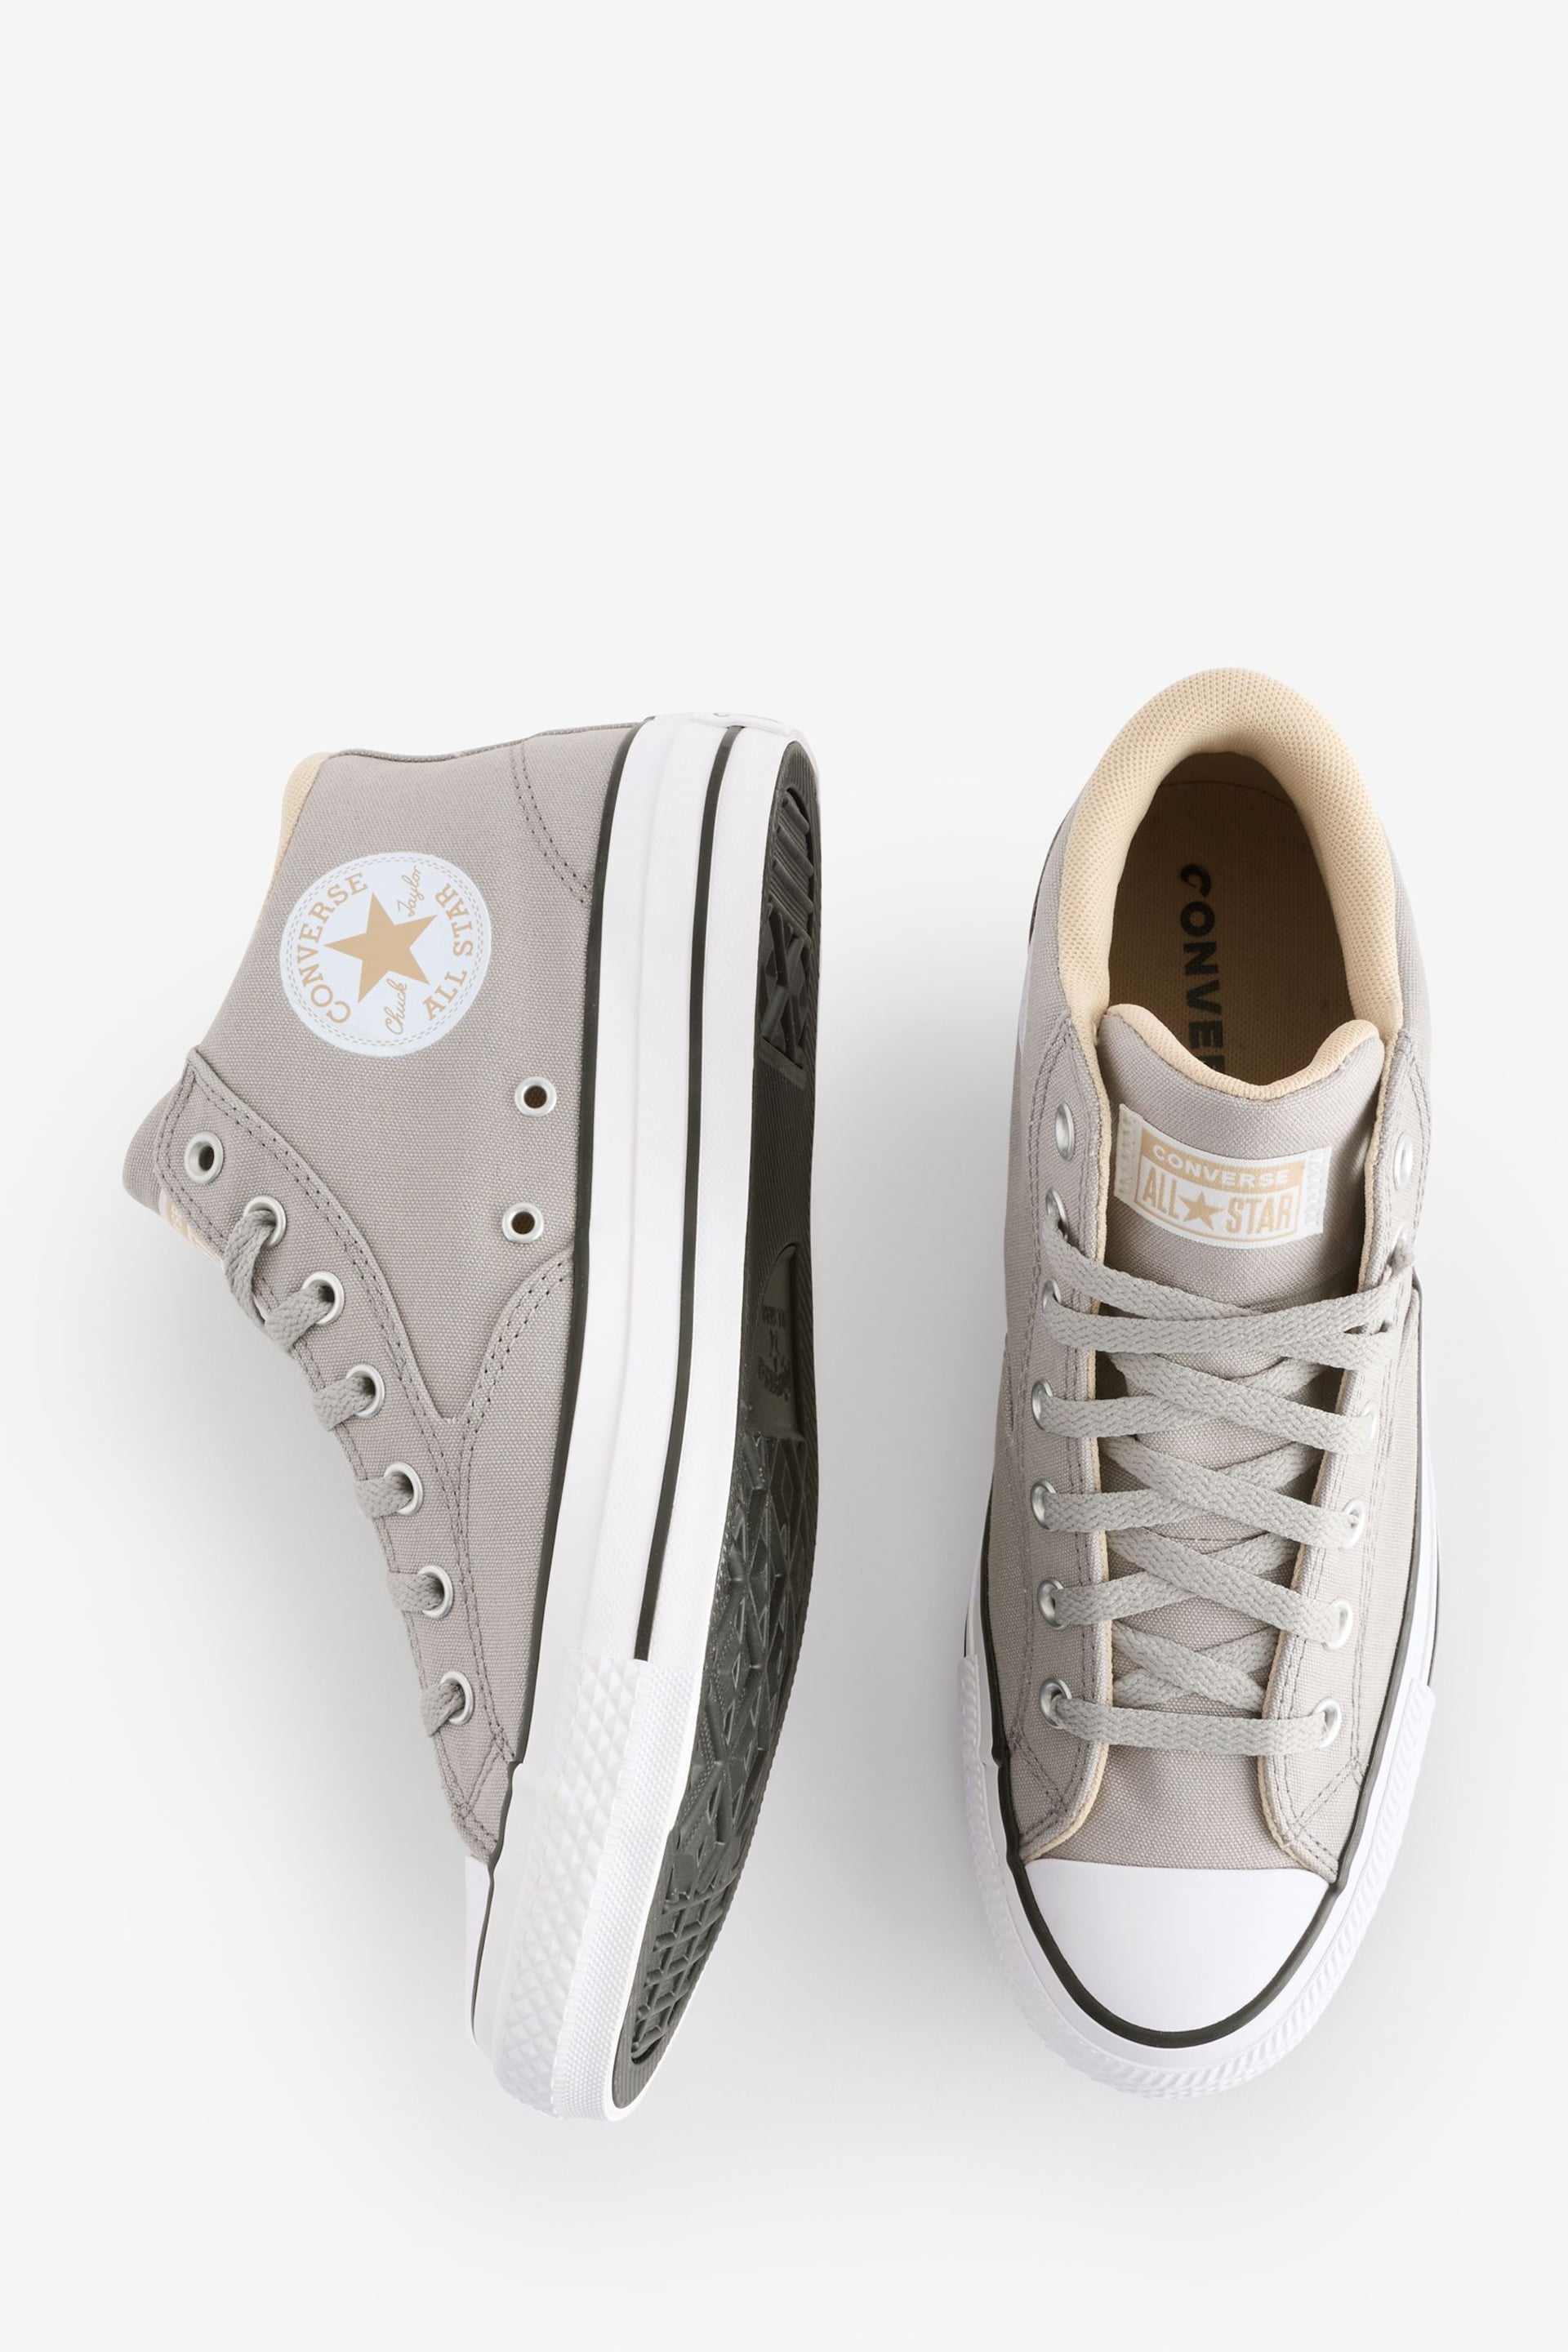 Converse Natural Chuck Taylor All Star Malden Street Trainers - Image 6 of 9